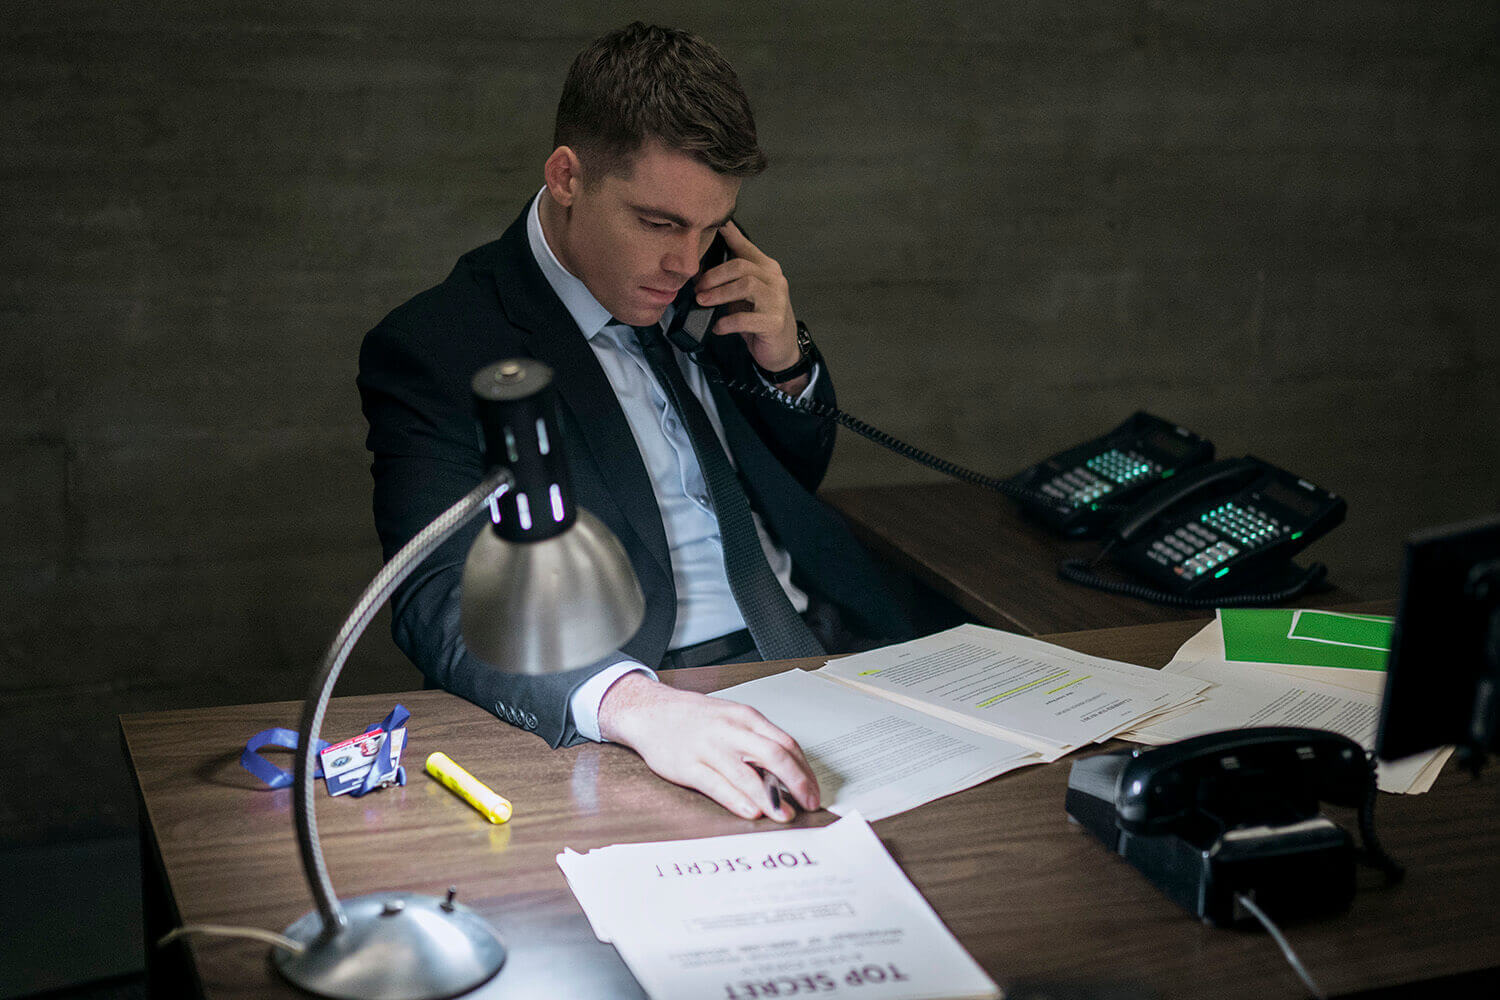 The Night Agent: Gabriel Basso as Peter Sutherland on a phone call at the Night Action desk while looking at documents